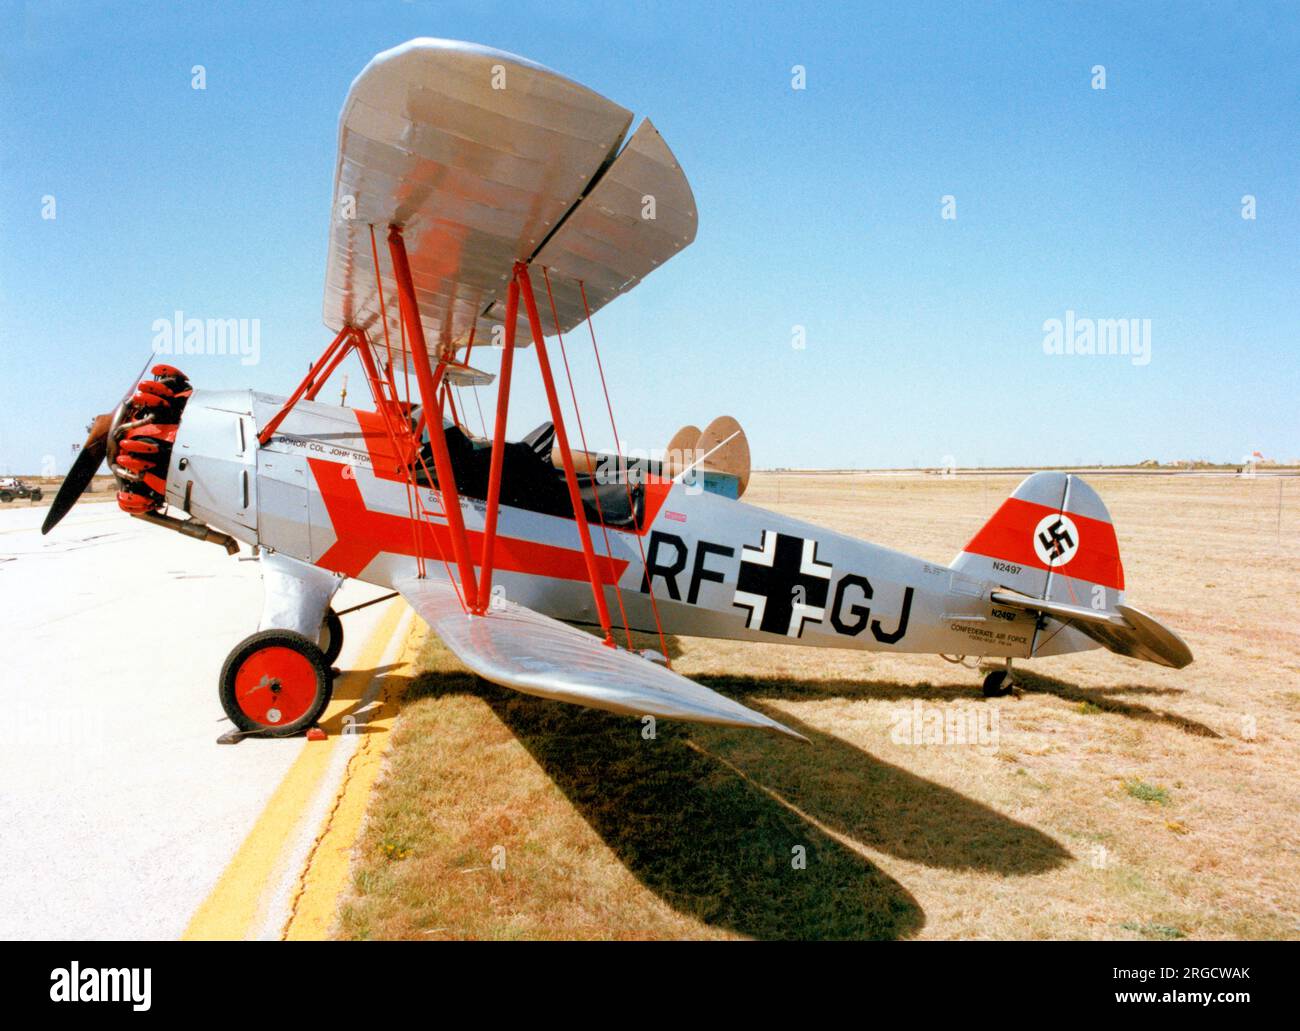 Focke-Wulf Fw.44J Stieglitz N2497 (msn 716), of the Confederate Air Force at Midland Airport on 8-10 October 1992. Stock Photo